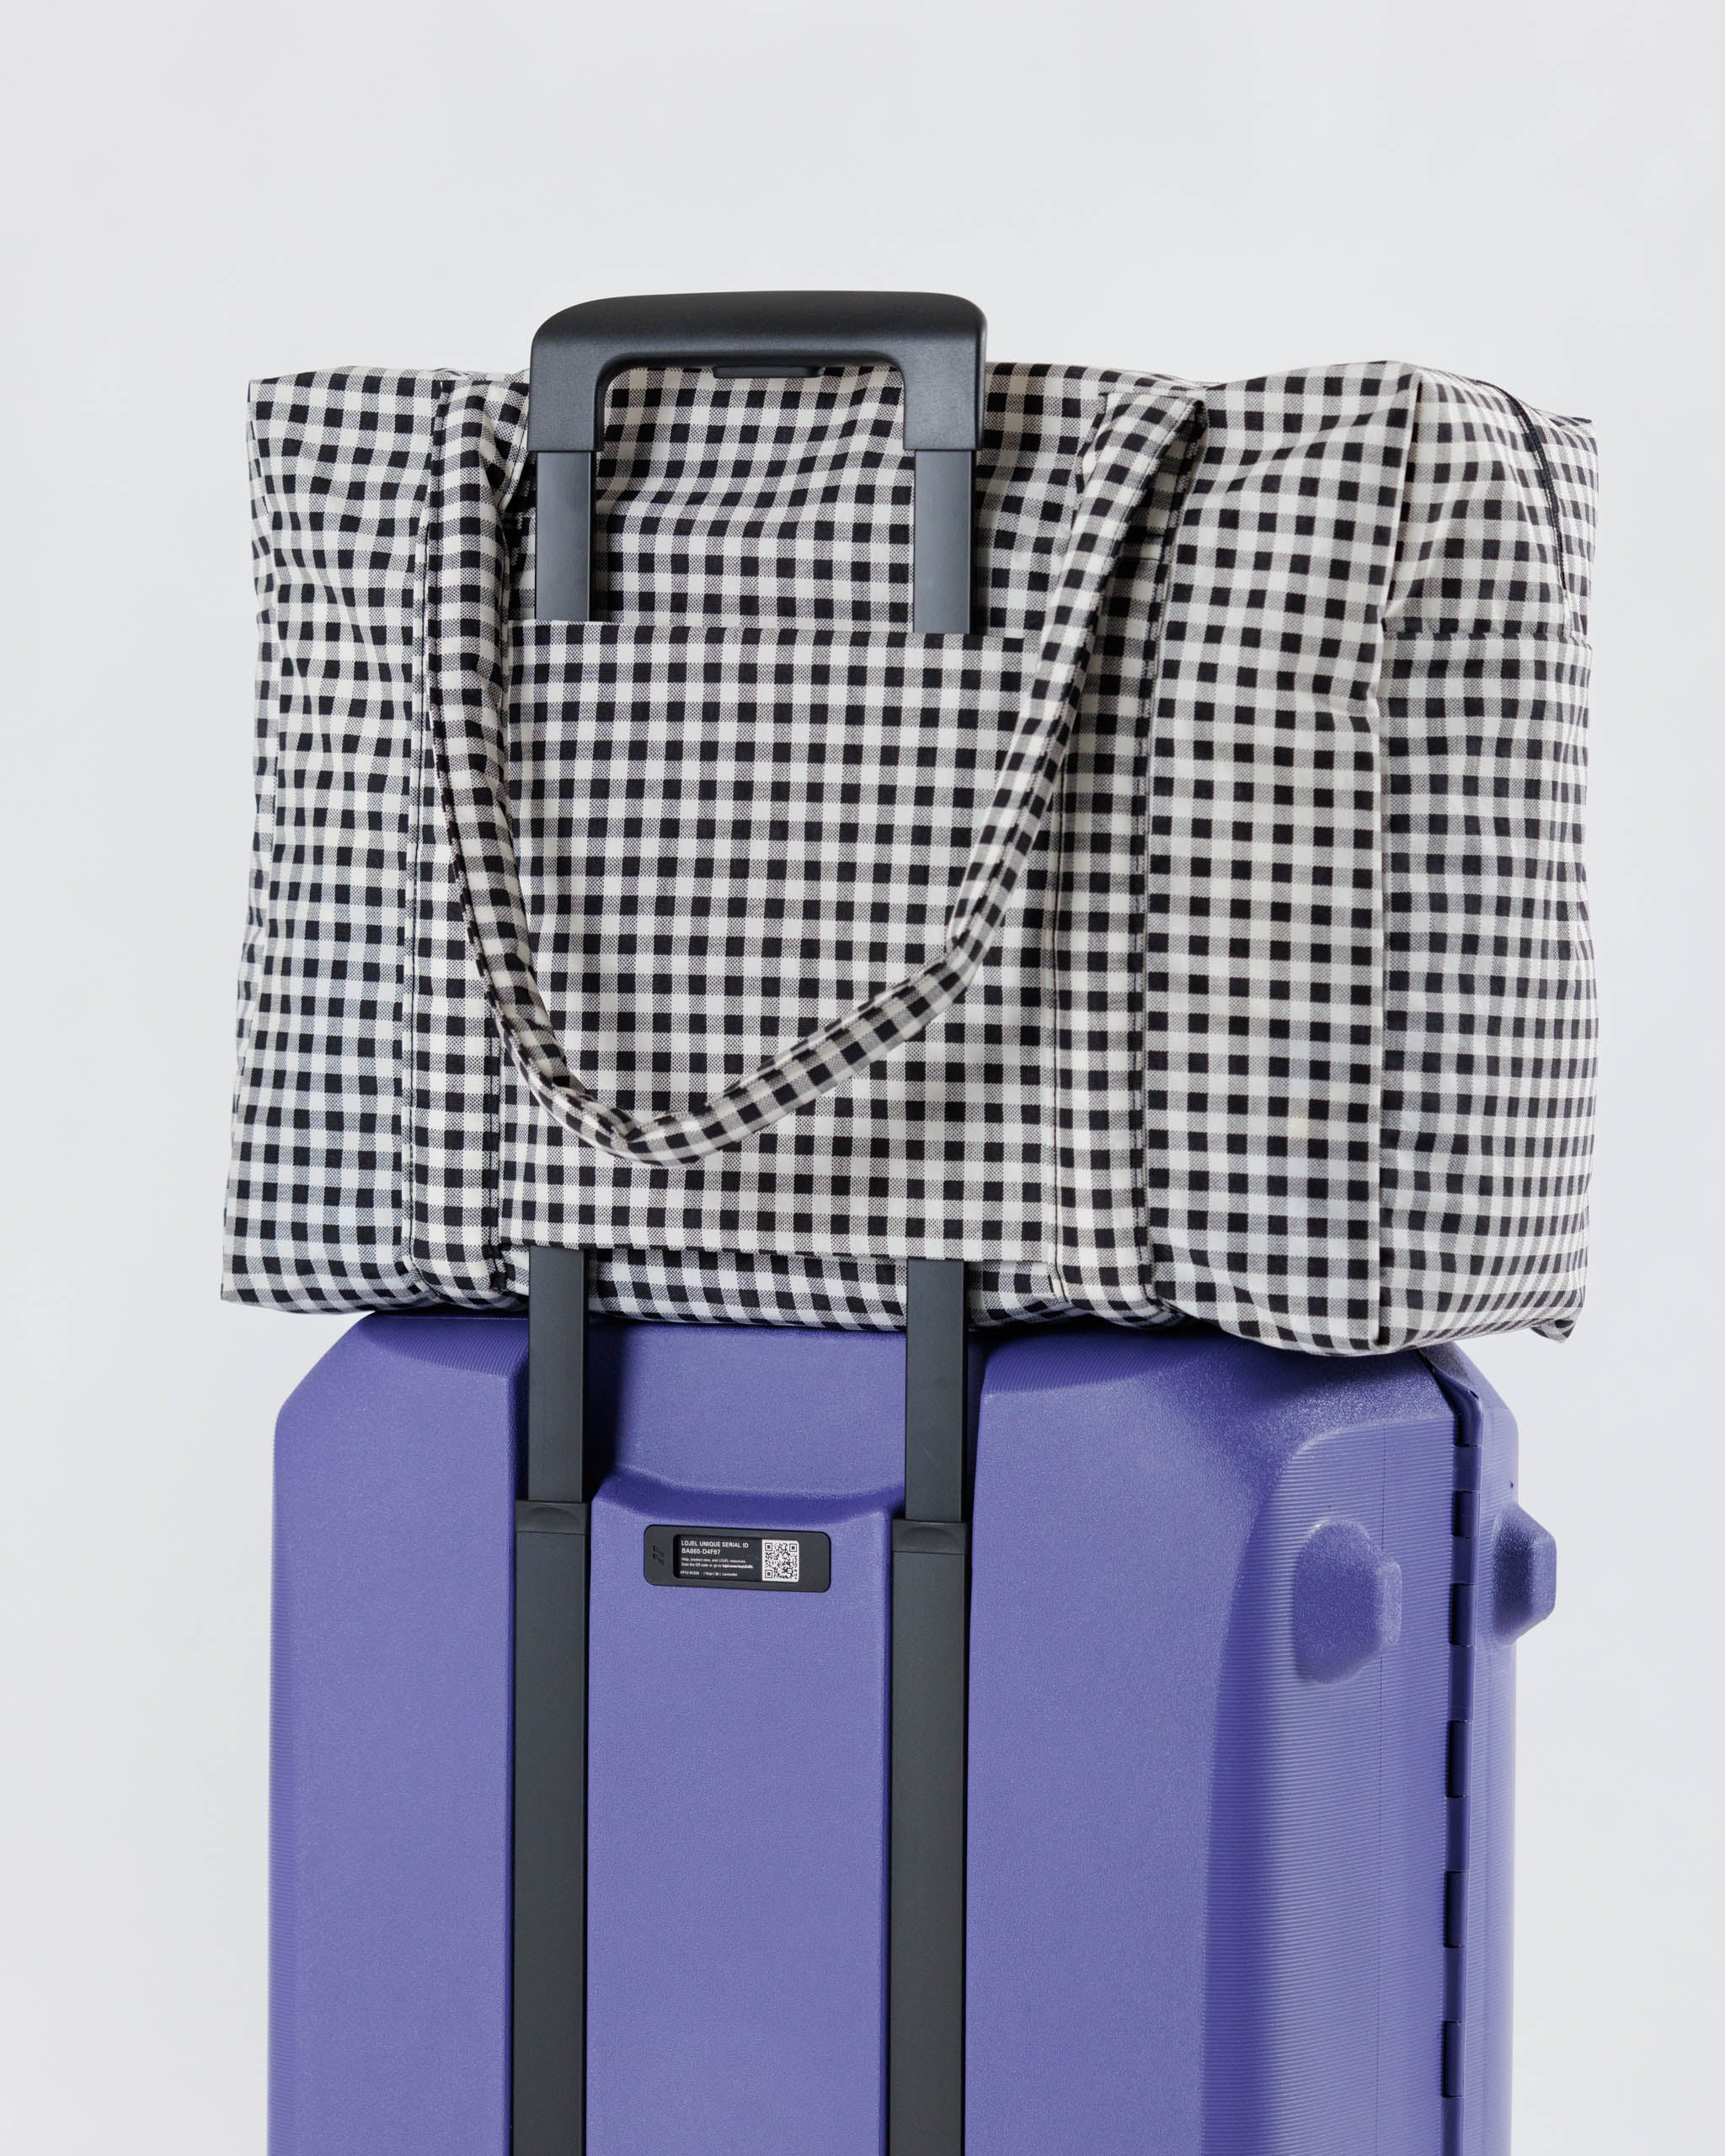 Cloud Carry On Bag (Black & White Gingham)